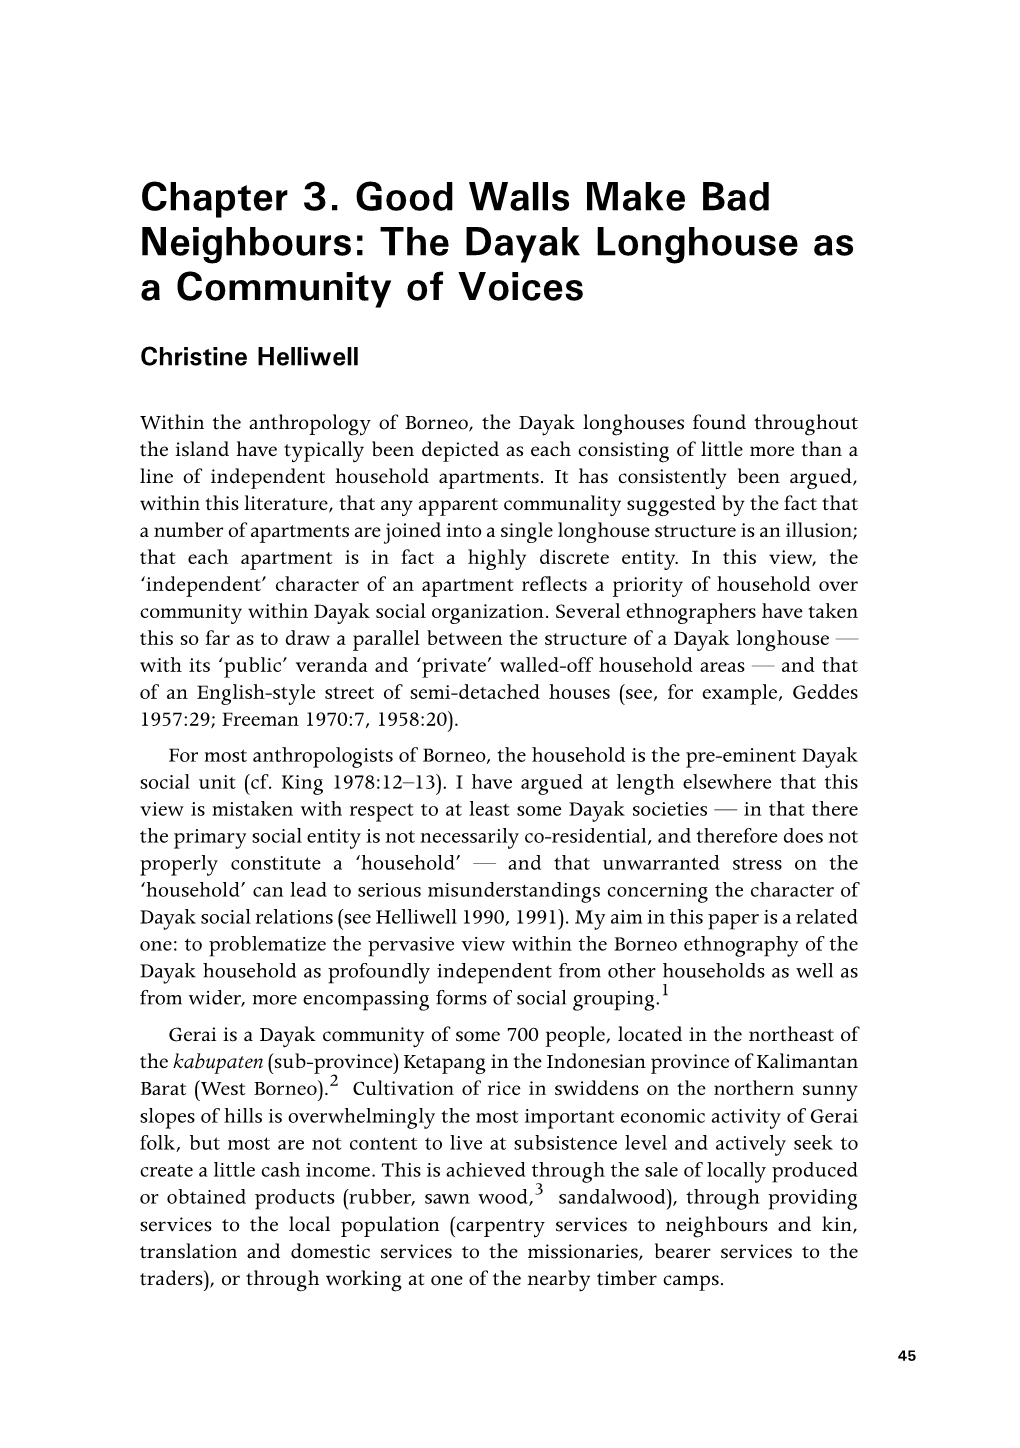 The Dayak Longhouse As a Community of Voices